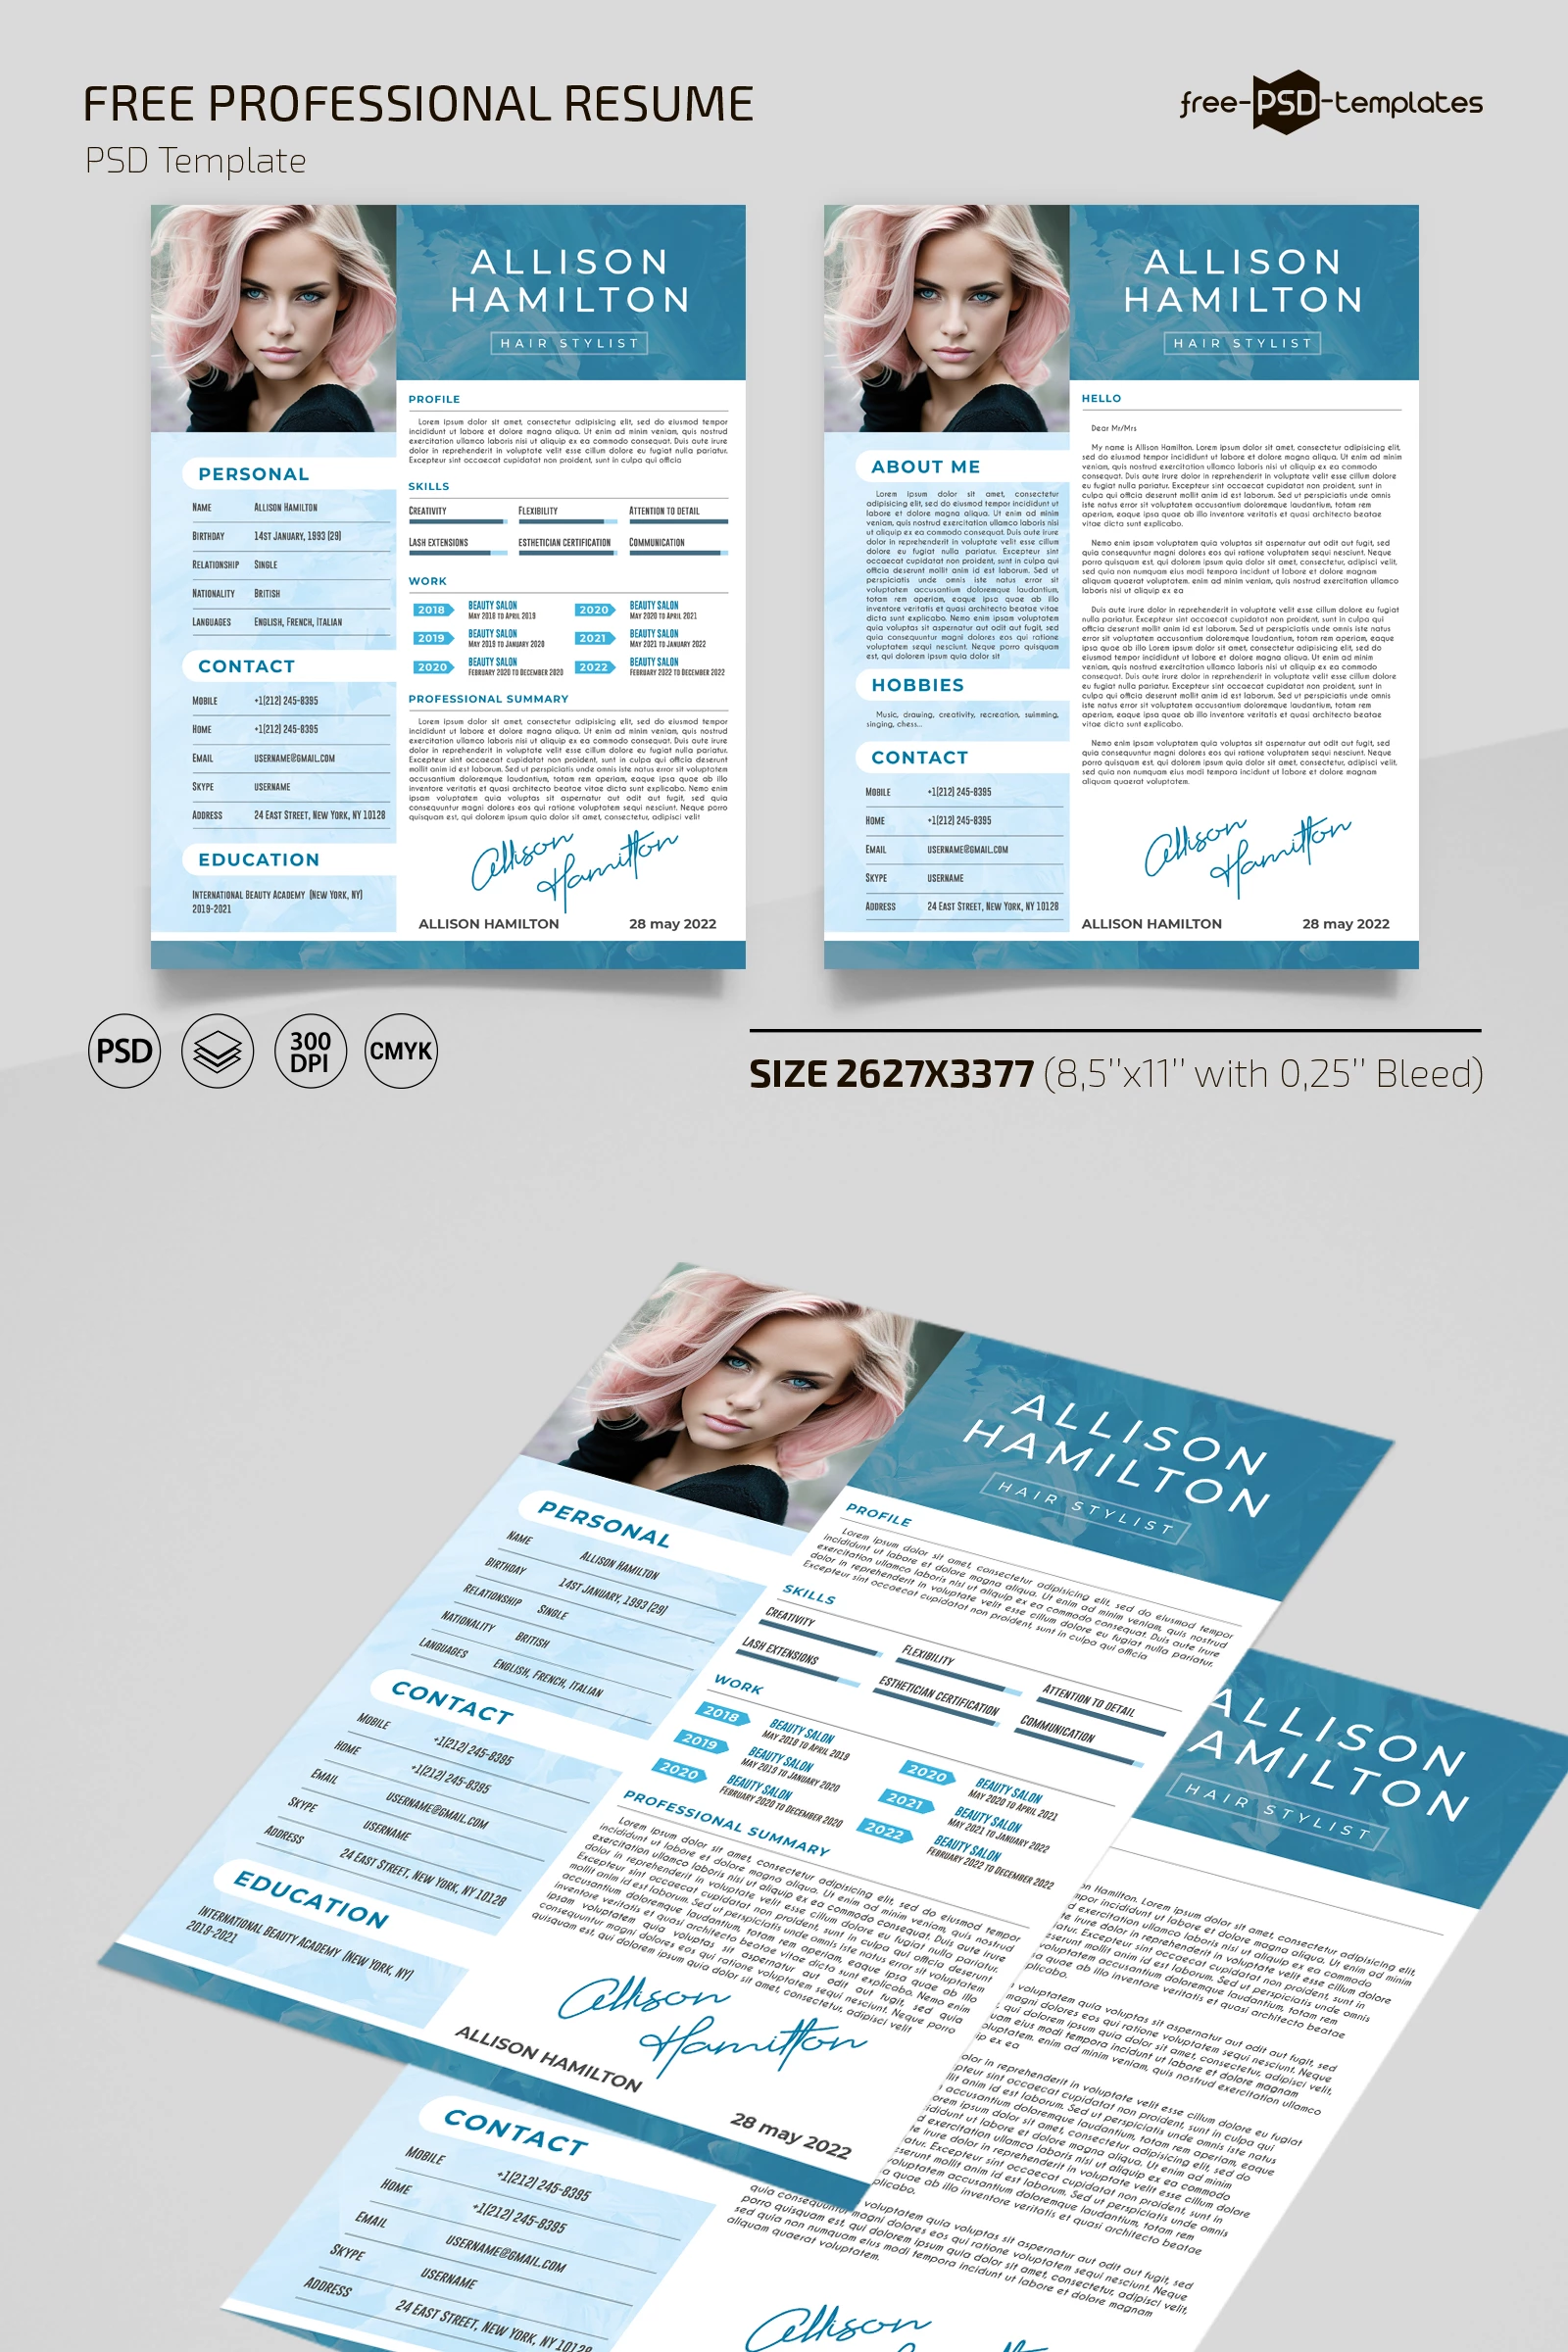 Free Blue Resume Template in PSD